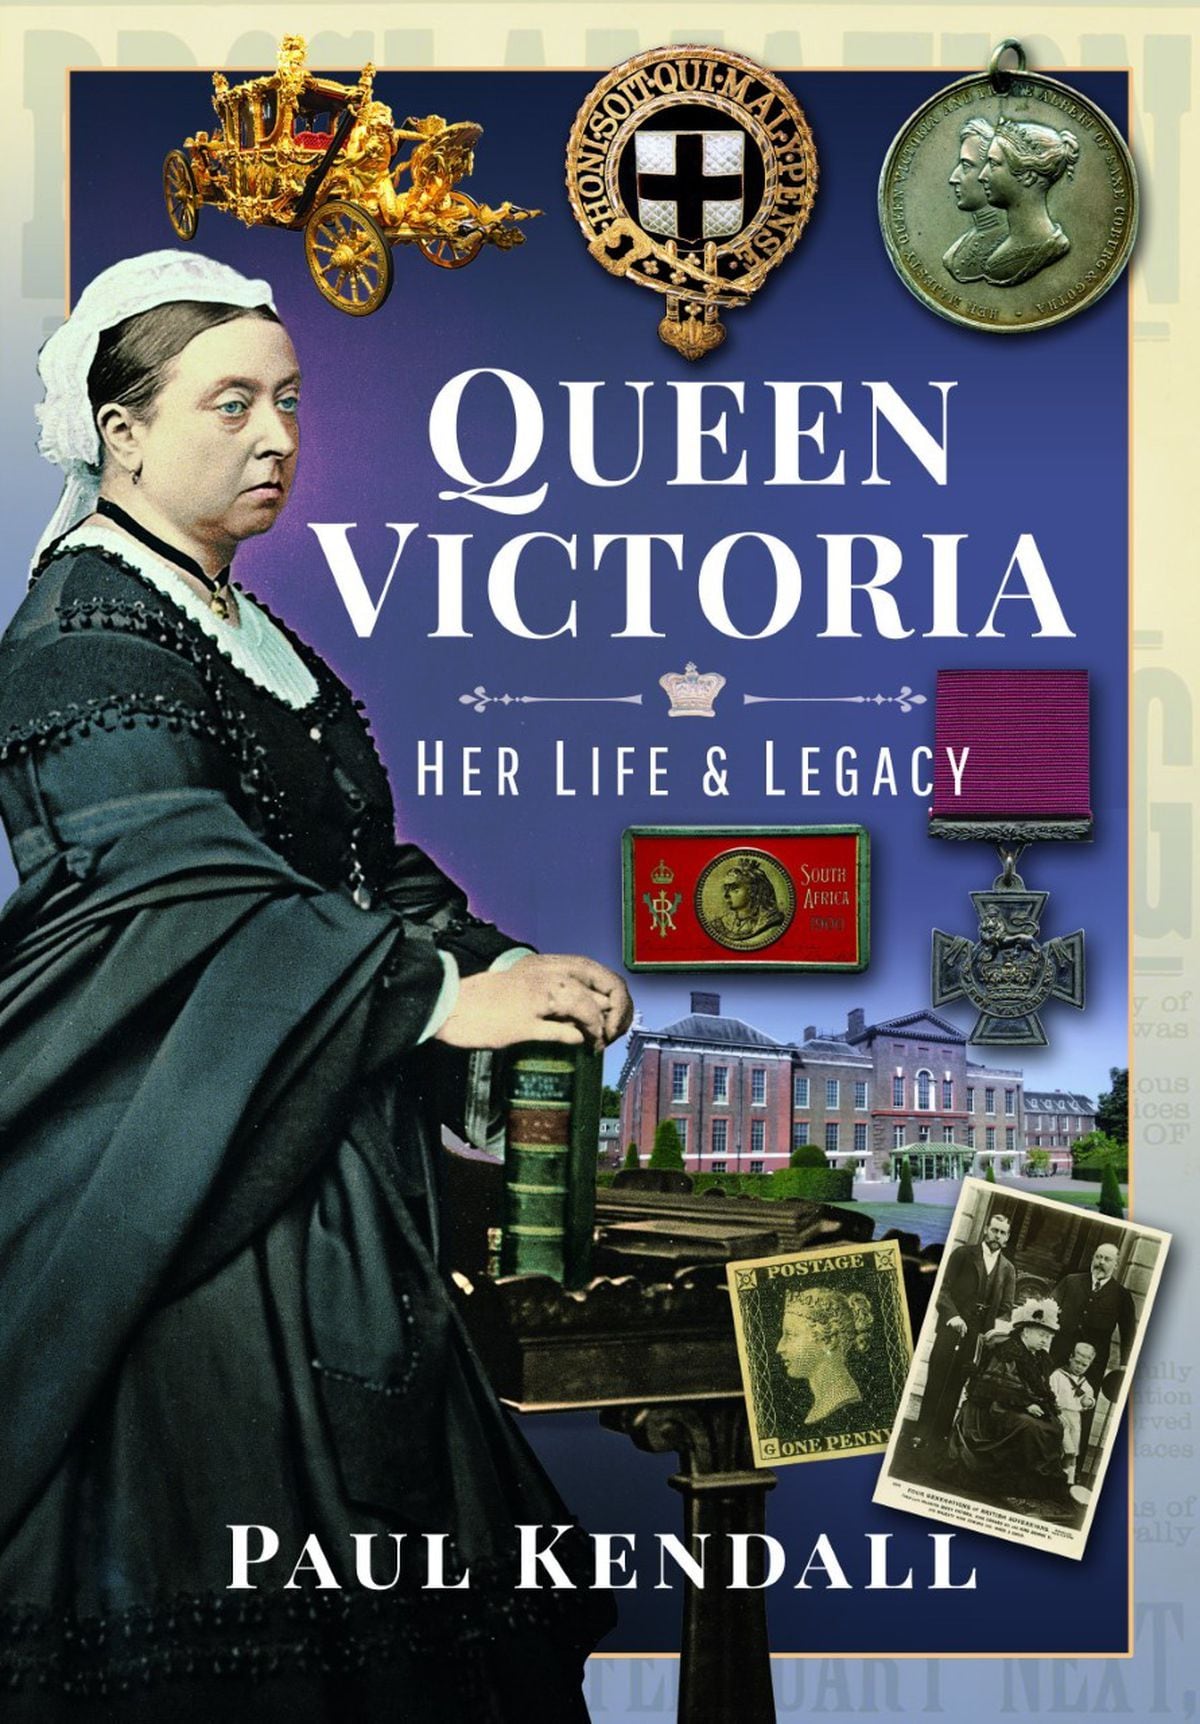 Queen Victoria's visit to Wolverhampton featured in the book Queen Victoria: Her Life & Legacy